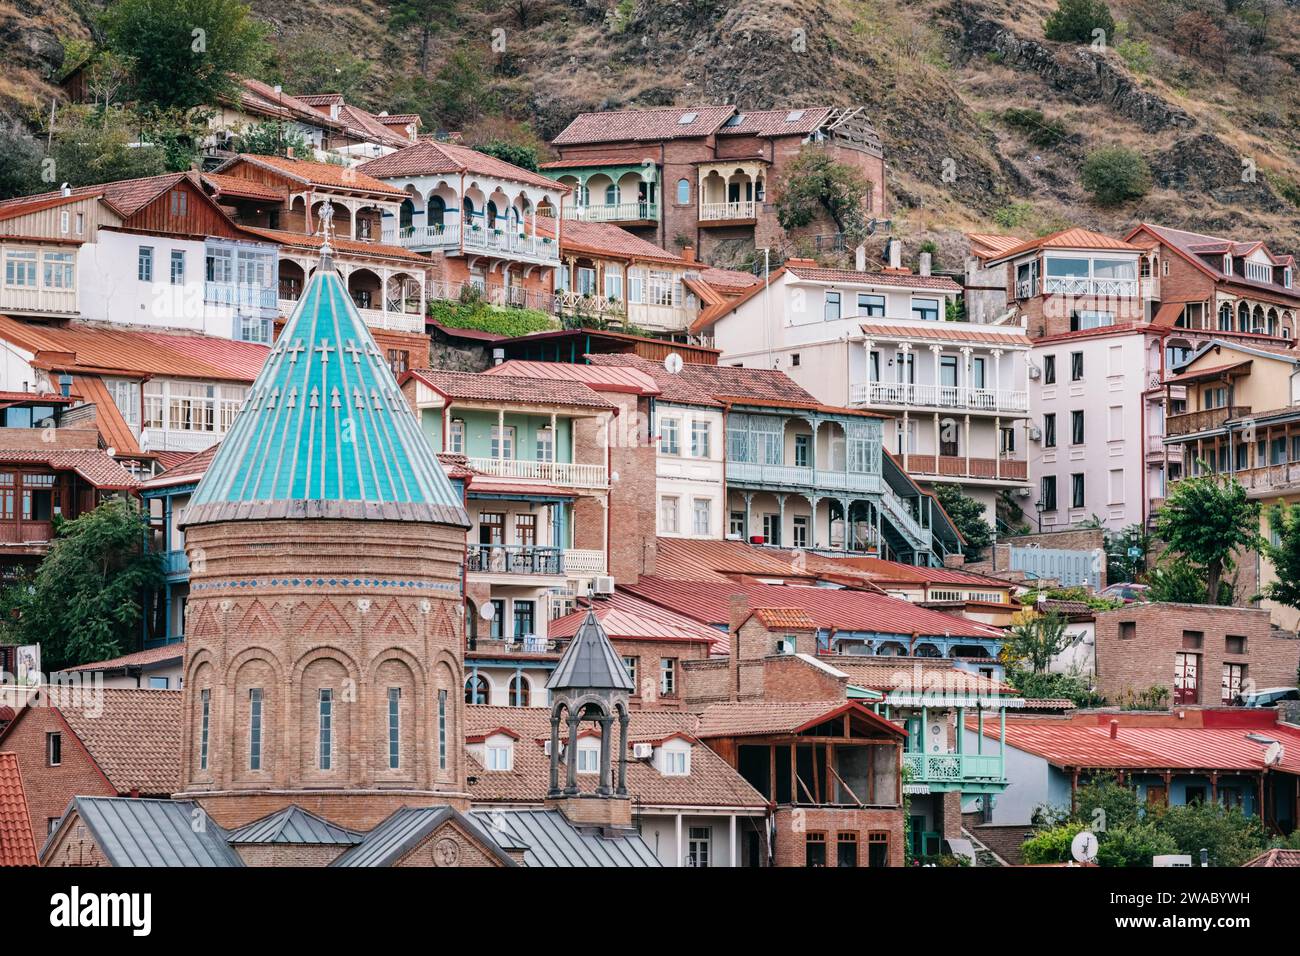 The blue roof of the bell tower of Saint George's church and the quaint facades with carved wooden balconies of Old Tbilisi Stock Photo